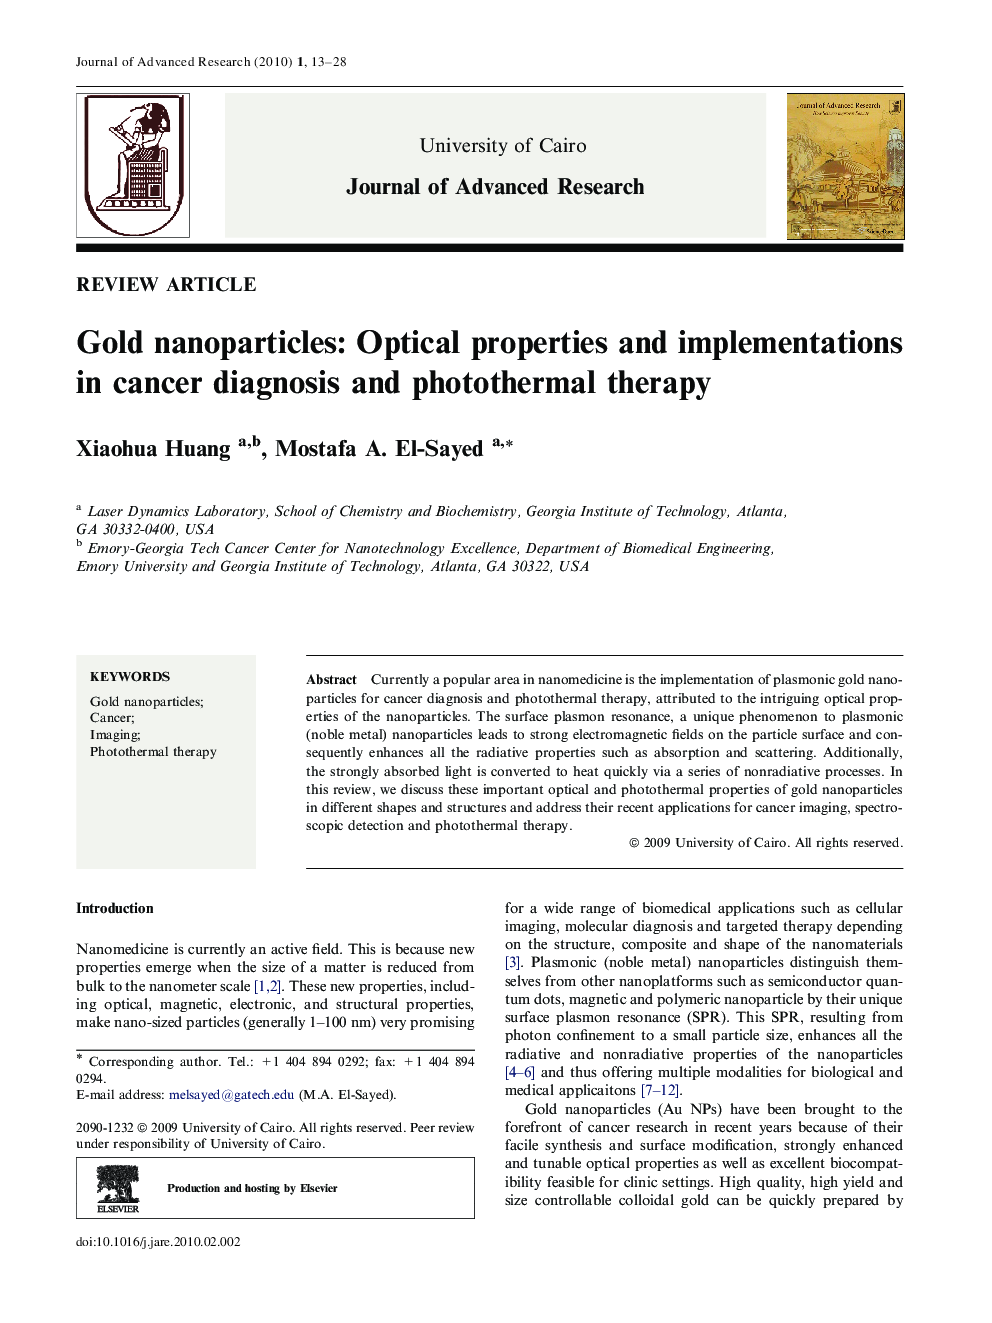 Gold nanoparticles: Optical properties and implementations in cancer diagnosis and photothermal therapy